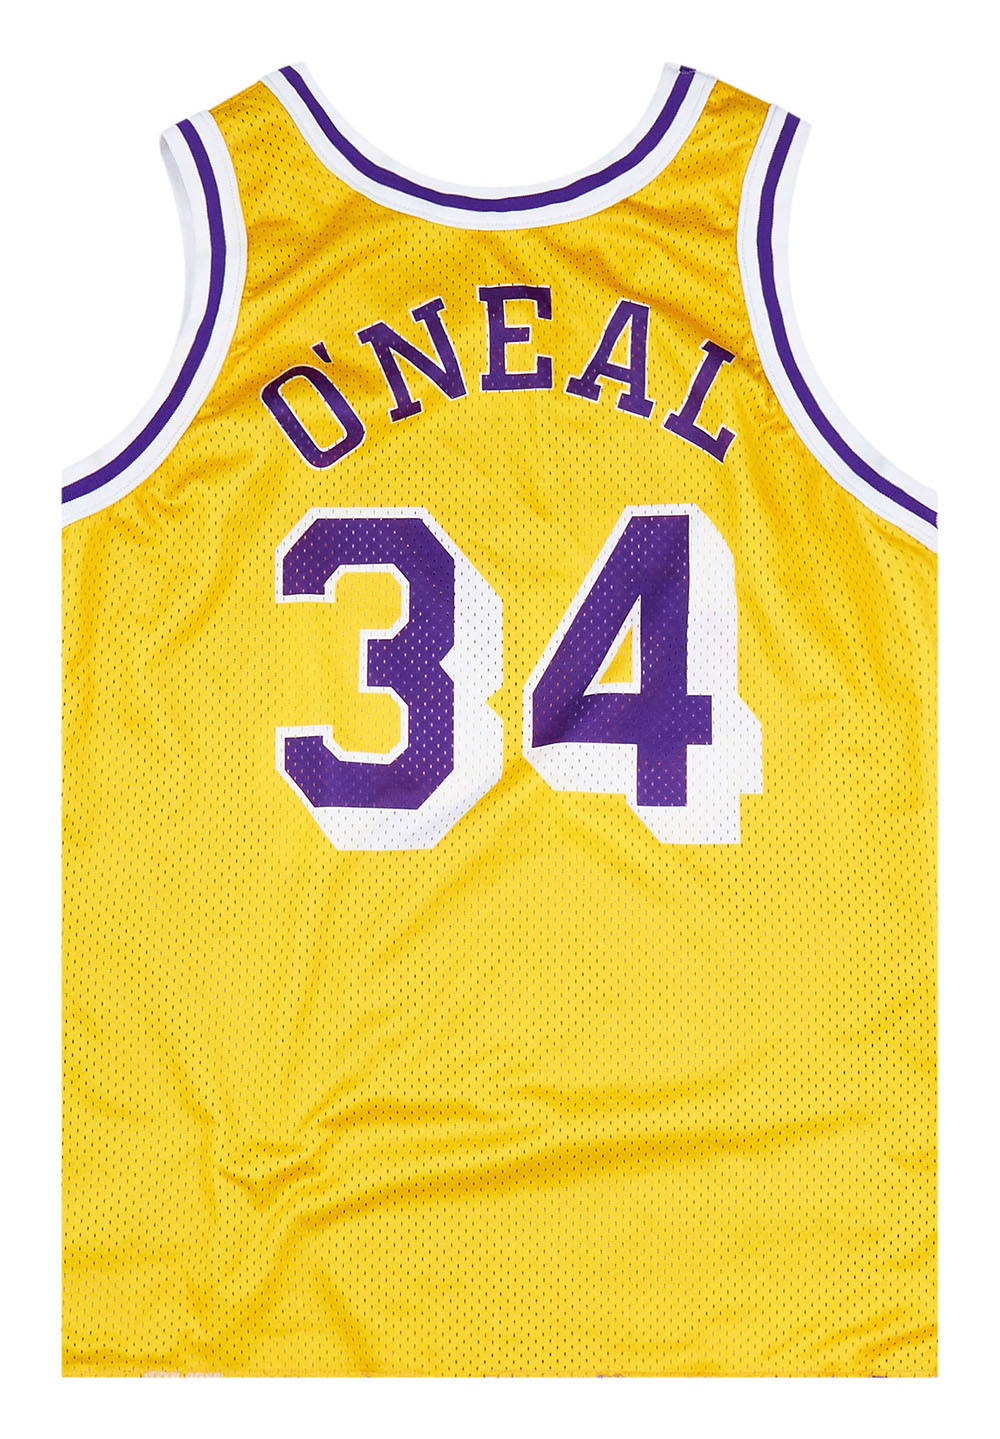 Vintage Shaquille O'Neil Jersey L.A. Lakers